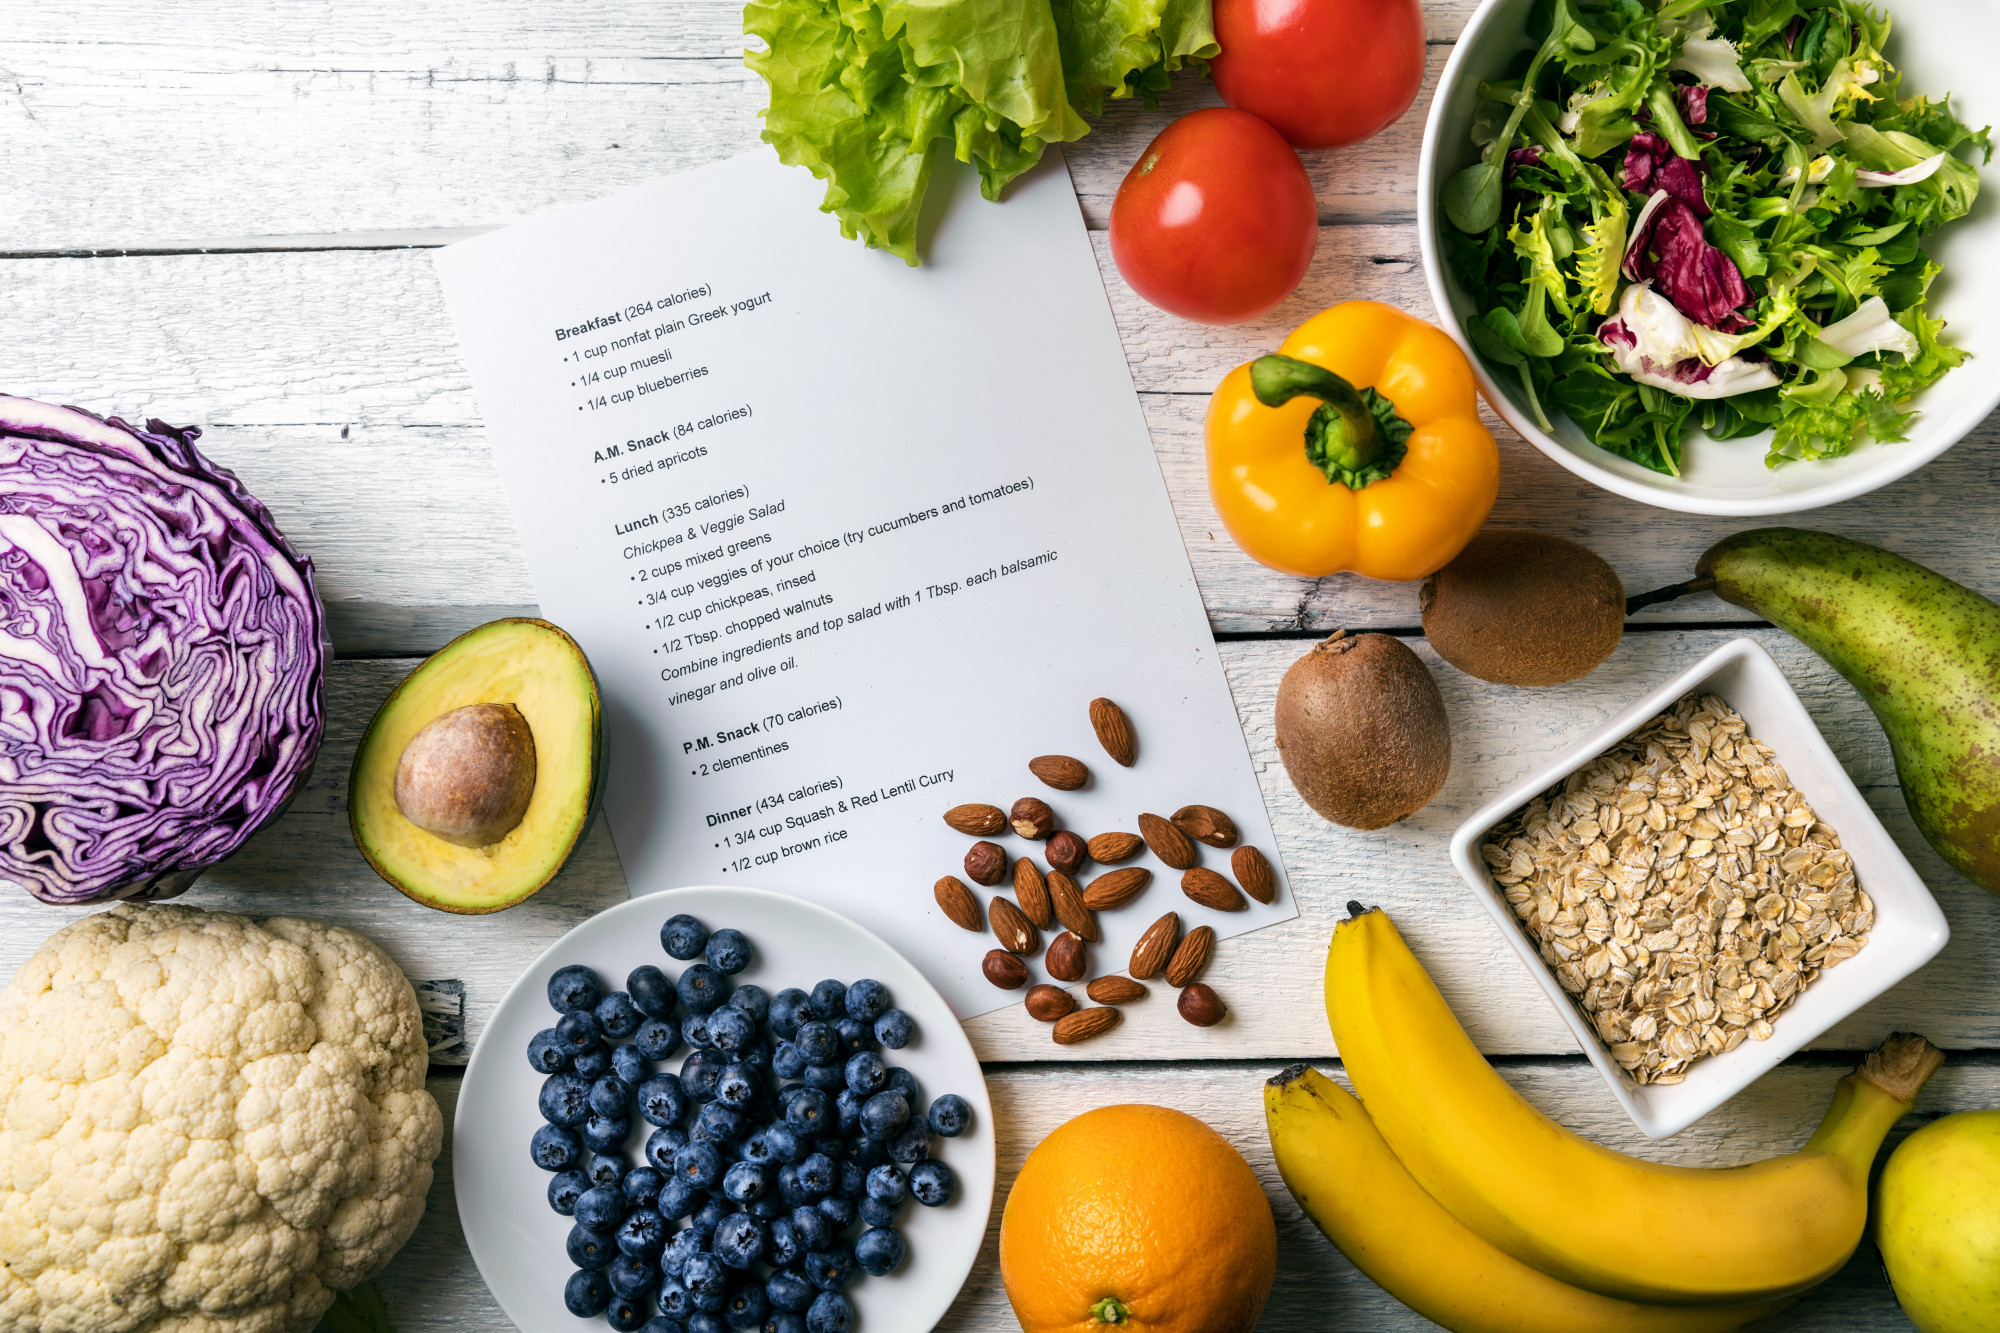 Are you wondering if there is a diet for Hashimoto thyroiditis that you should try? Keep reading and learn about your options here.